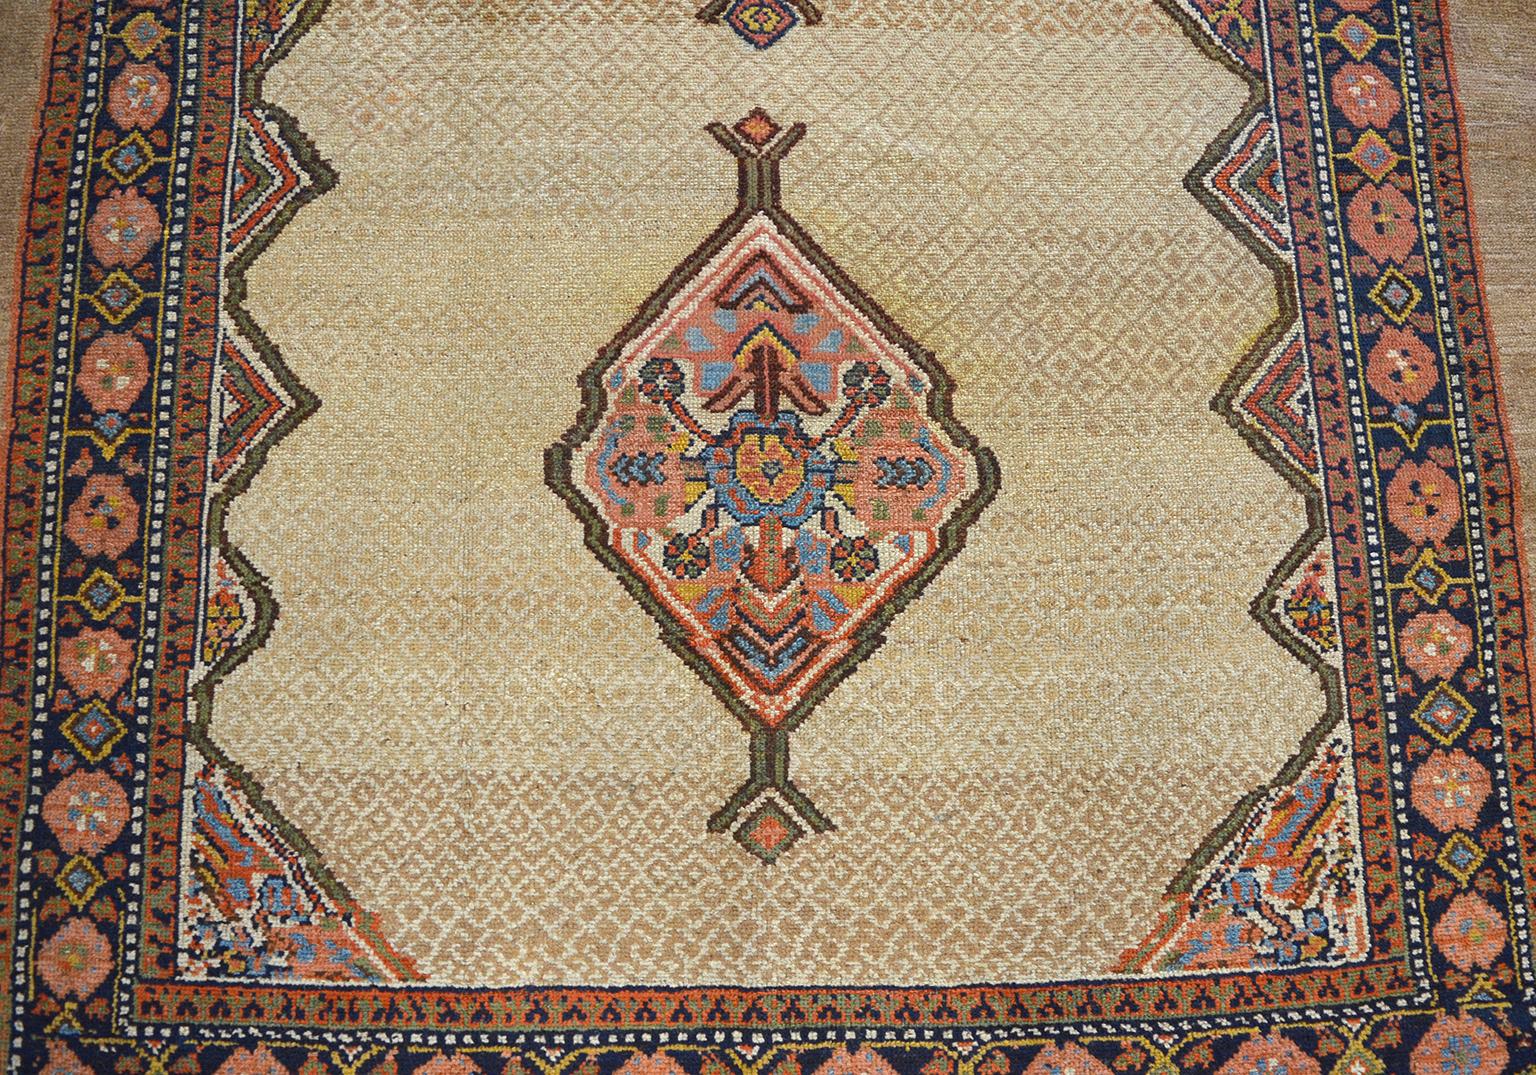 This antique Seraband Persian carpet in handspun camel wool is hand knotted in a Persian Seraband weave and uses organic vegetal dyes, circa 1880. Characterized by its unique coloration of camel, gold, light blue, pink and green, the balanced design